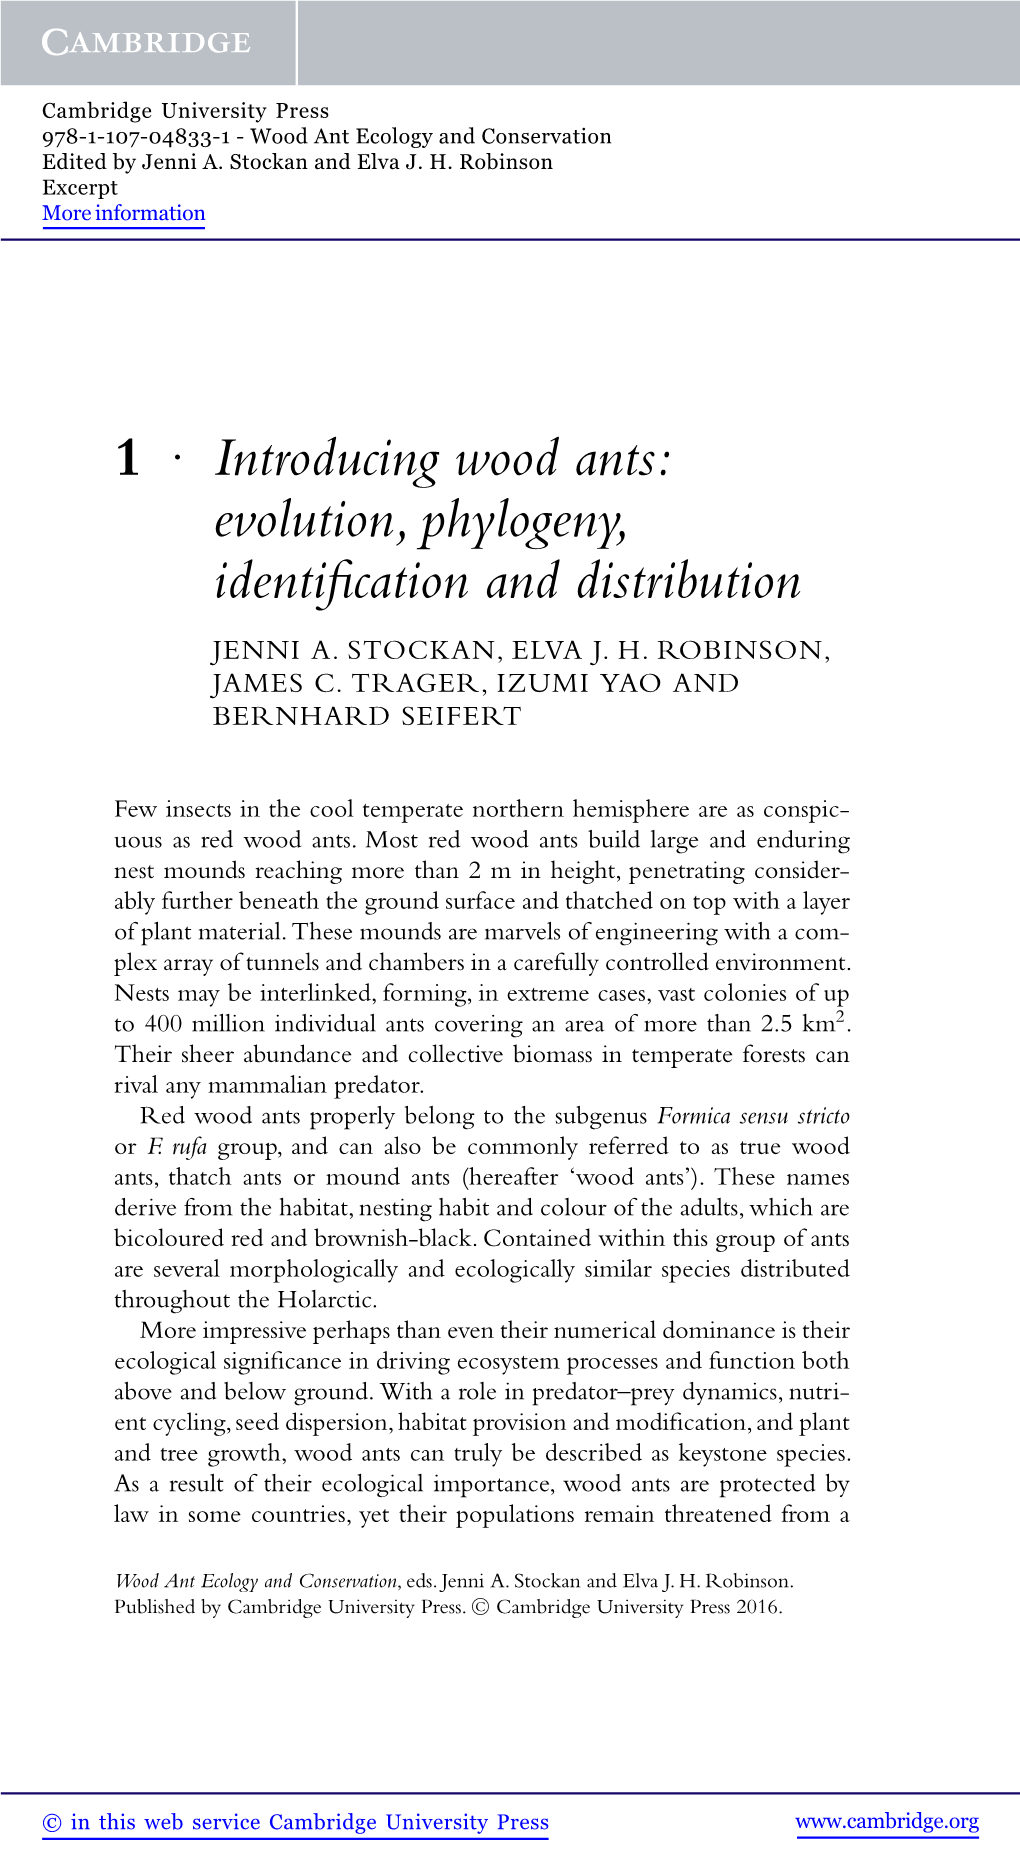 1 R Introducing Wood Ants: Evolution, Phylogeny, Identification and Distribution JENNI A